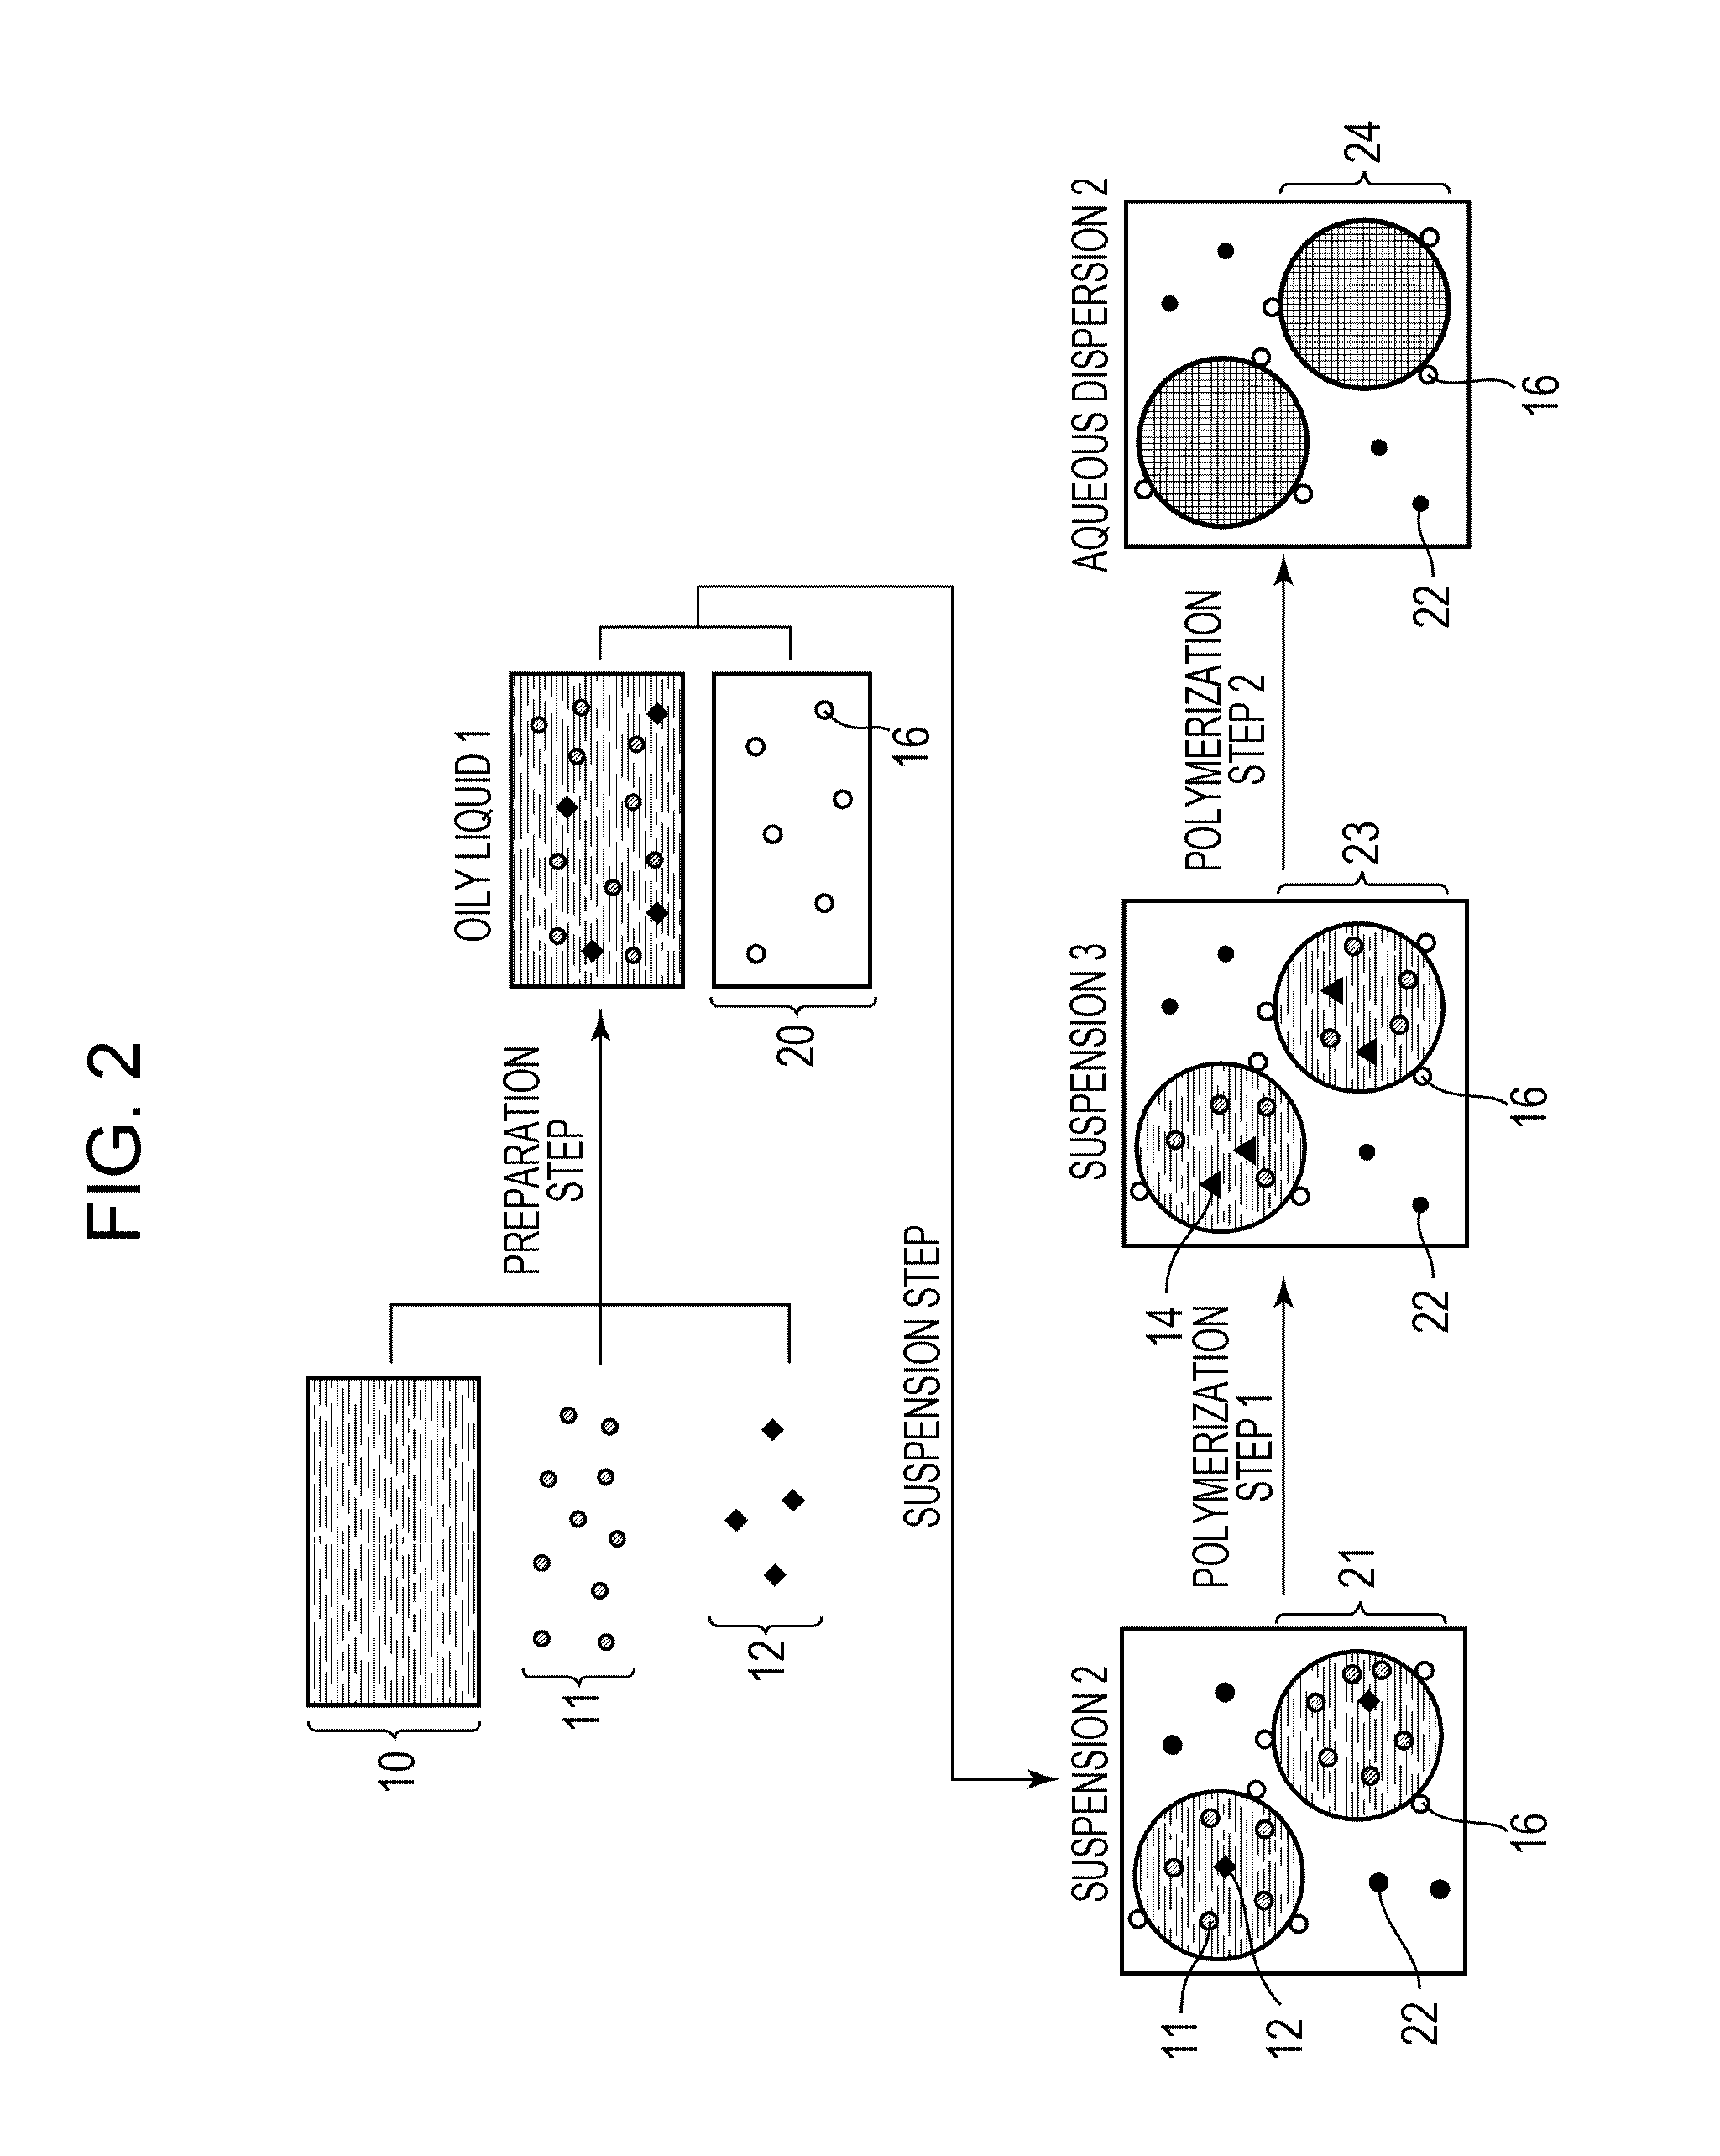 Method for producing polymer particles